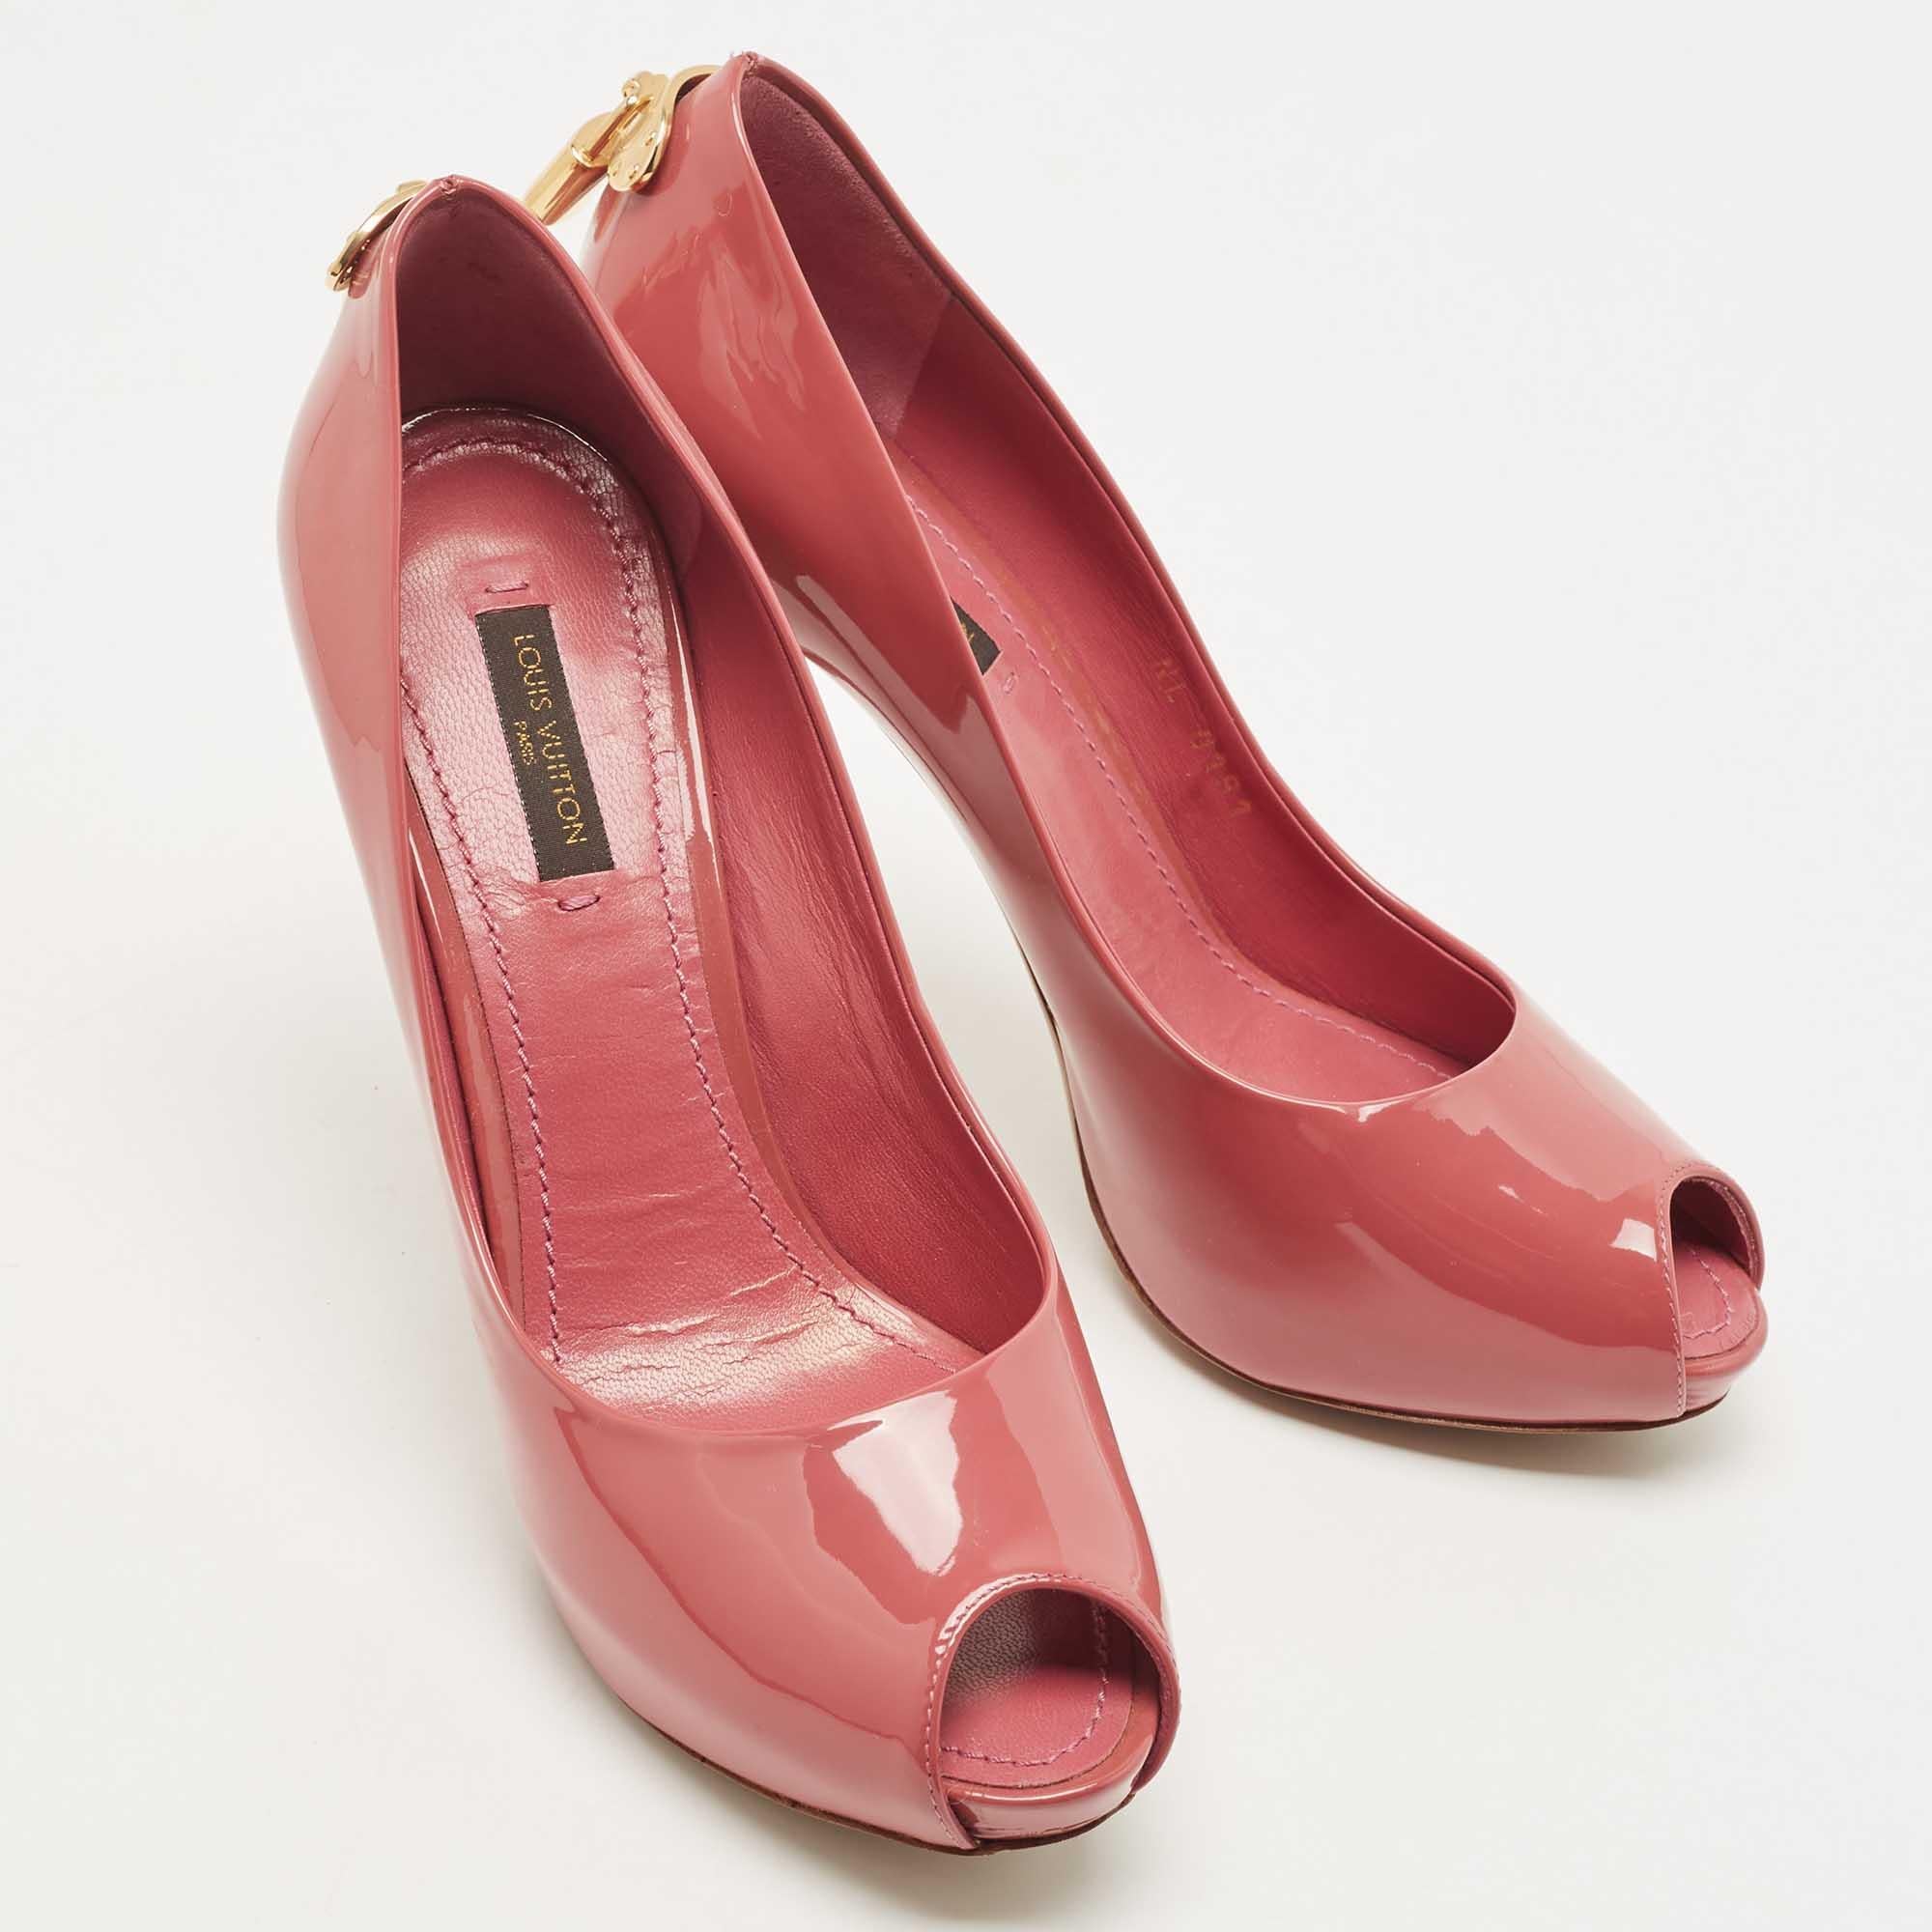 Louis Vuitton Red Patent Leather Oh Really! Pumps Size 36.5 In Good Condition For Sale In Dubai, Al Qouz 2